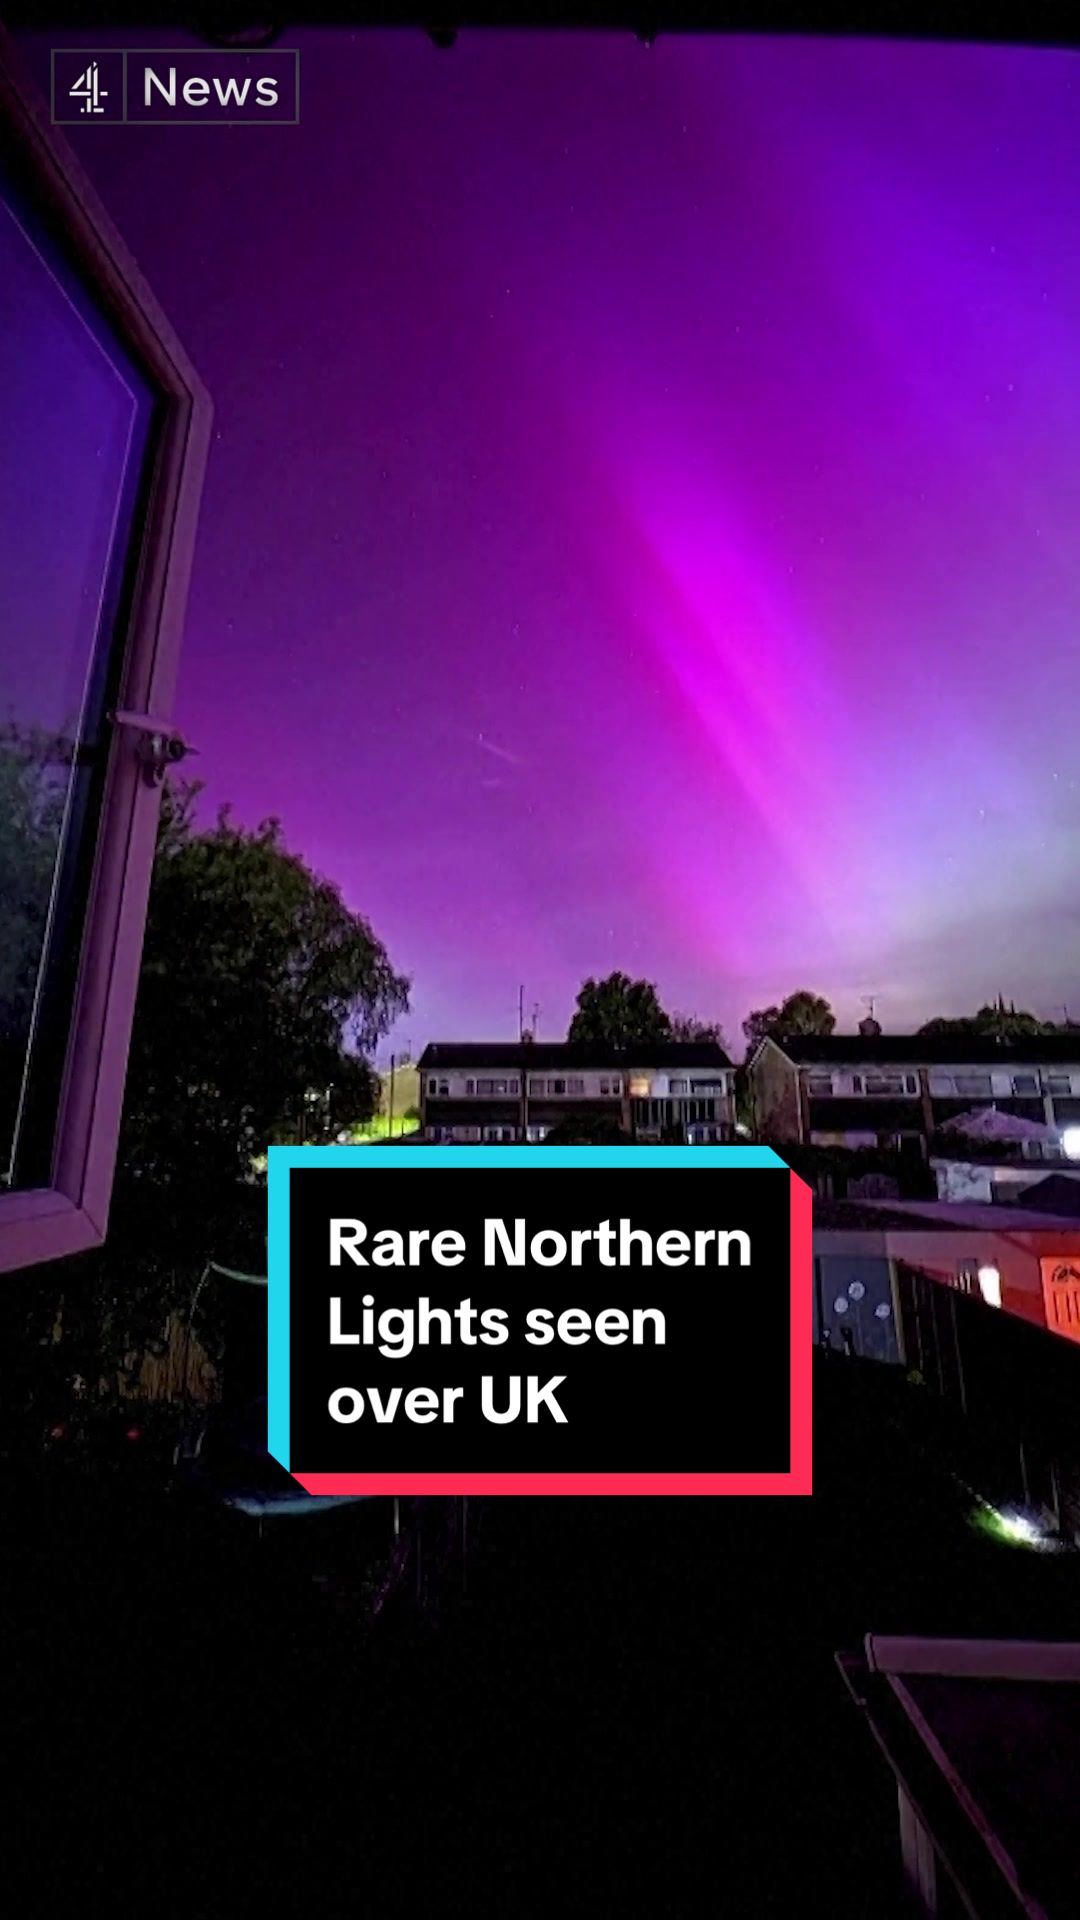 The Northern lights have made a rare appearance over the UK, after an 'extreme' geomagnetic hit Earth. The phenomenon, also known as Aurora Borealis, is caused by electrically charged particles interacting with gases in the Earth's atmosphere. #News #Channel4News #C4News #NorthernLights #AuroraBorealis #Earth